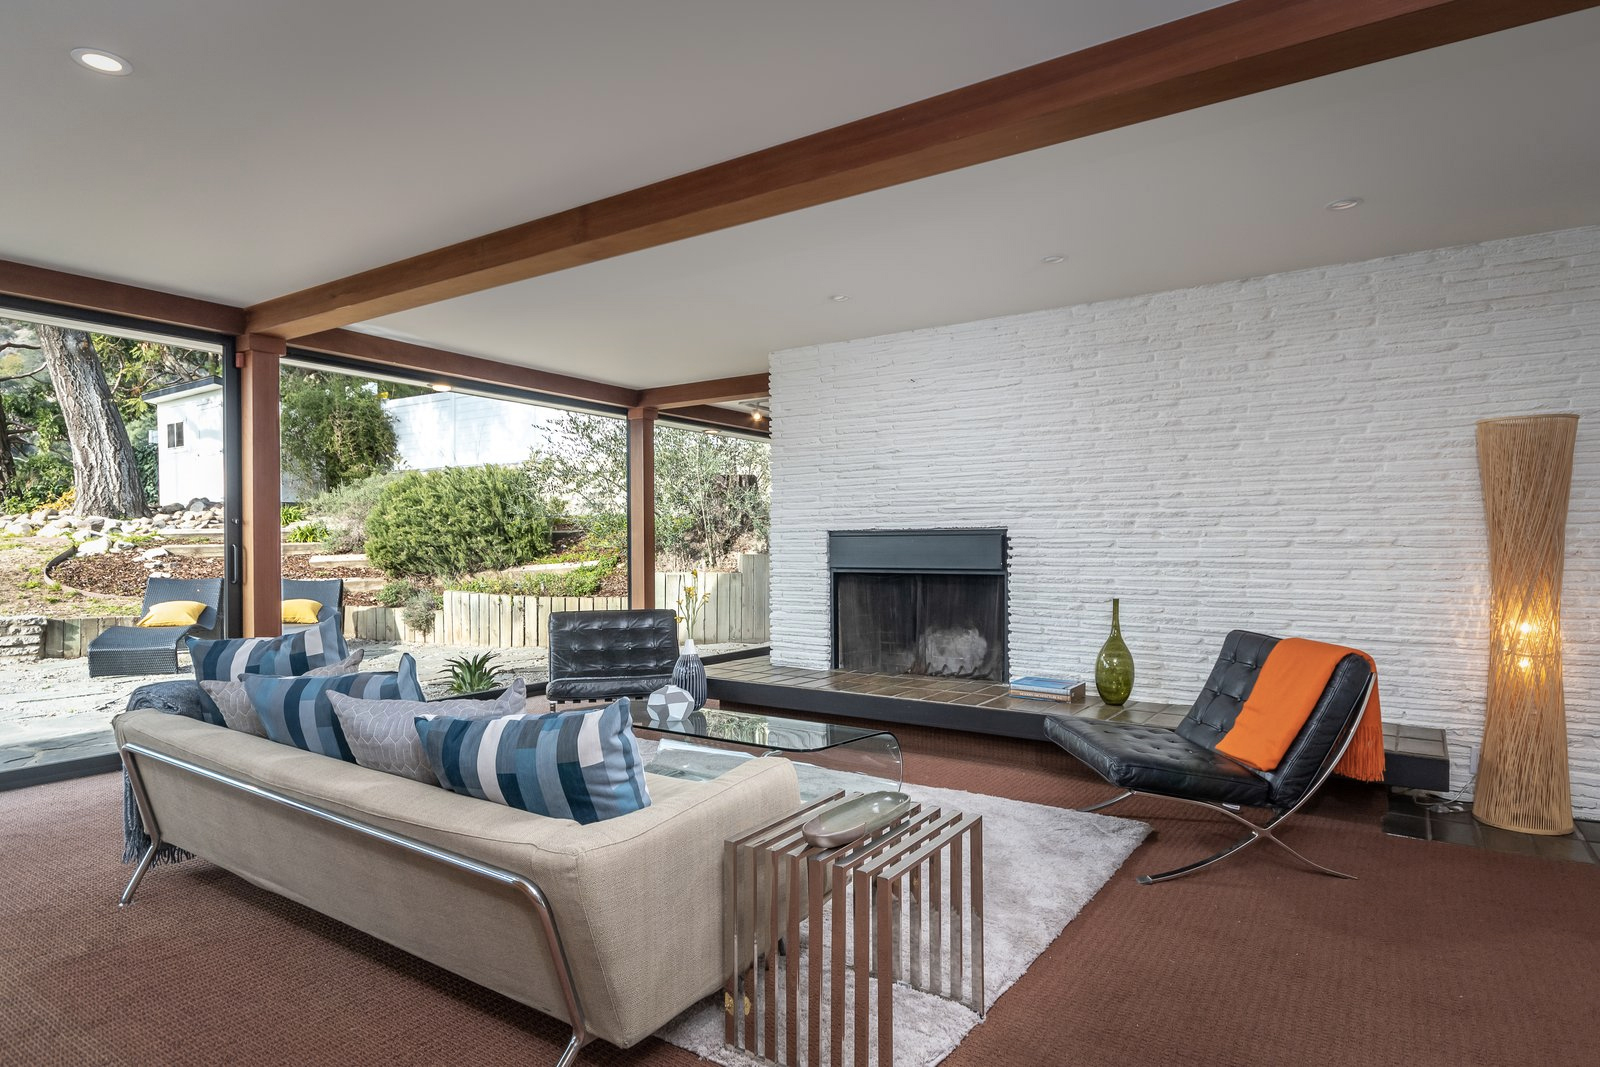 Pierre Koenig’s experimental Squire House is for sale in California